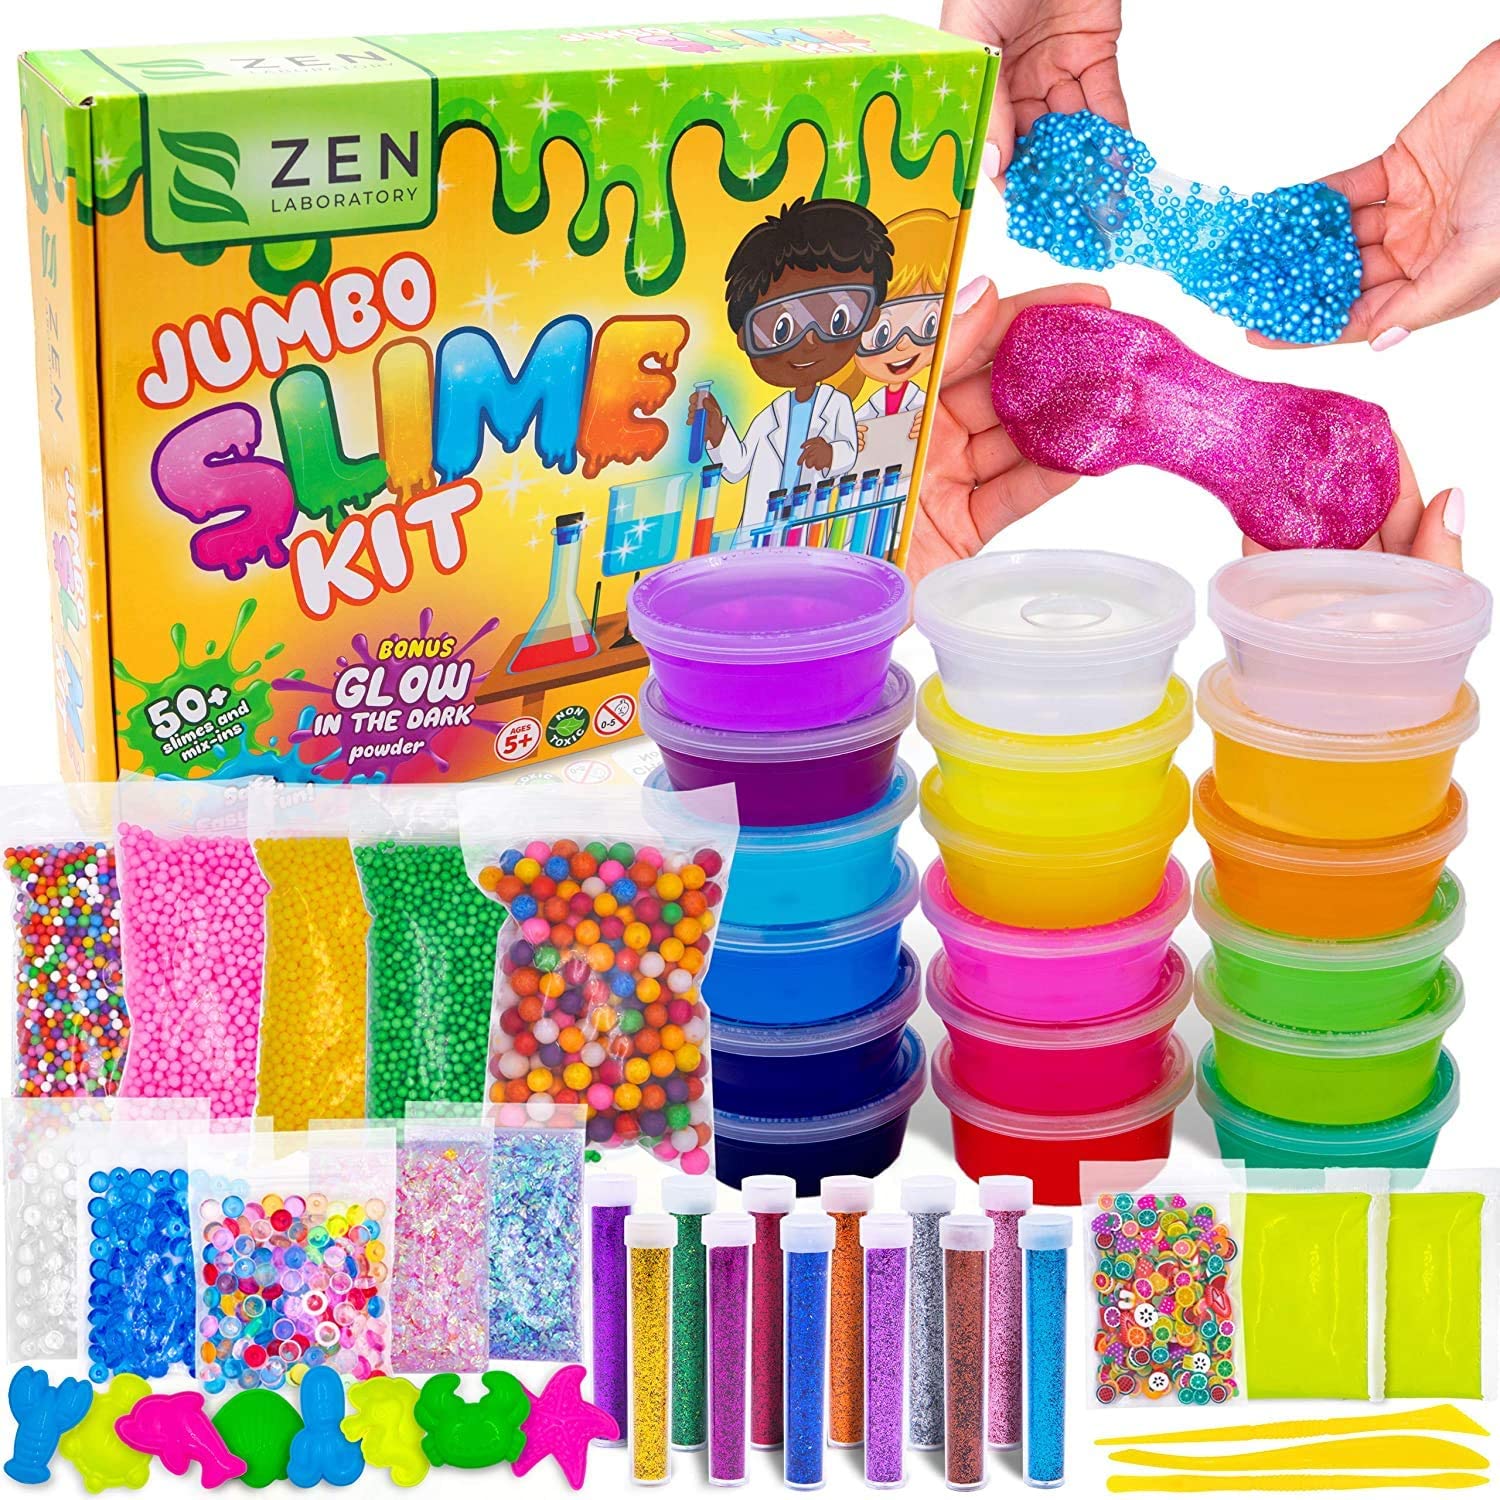 Original Stationery Fluffy Slime Kit for Girls Everything in One Box to Make Ice